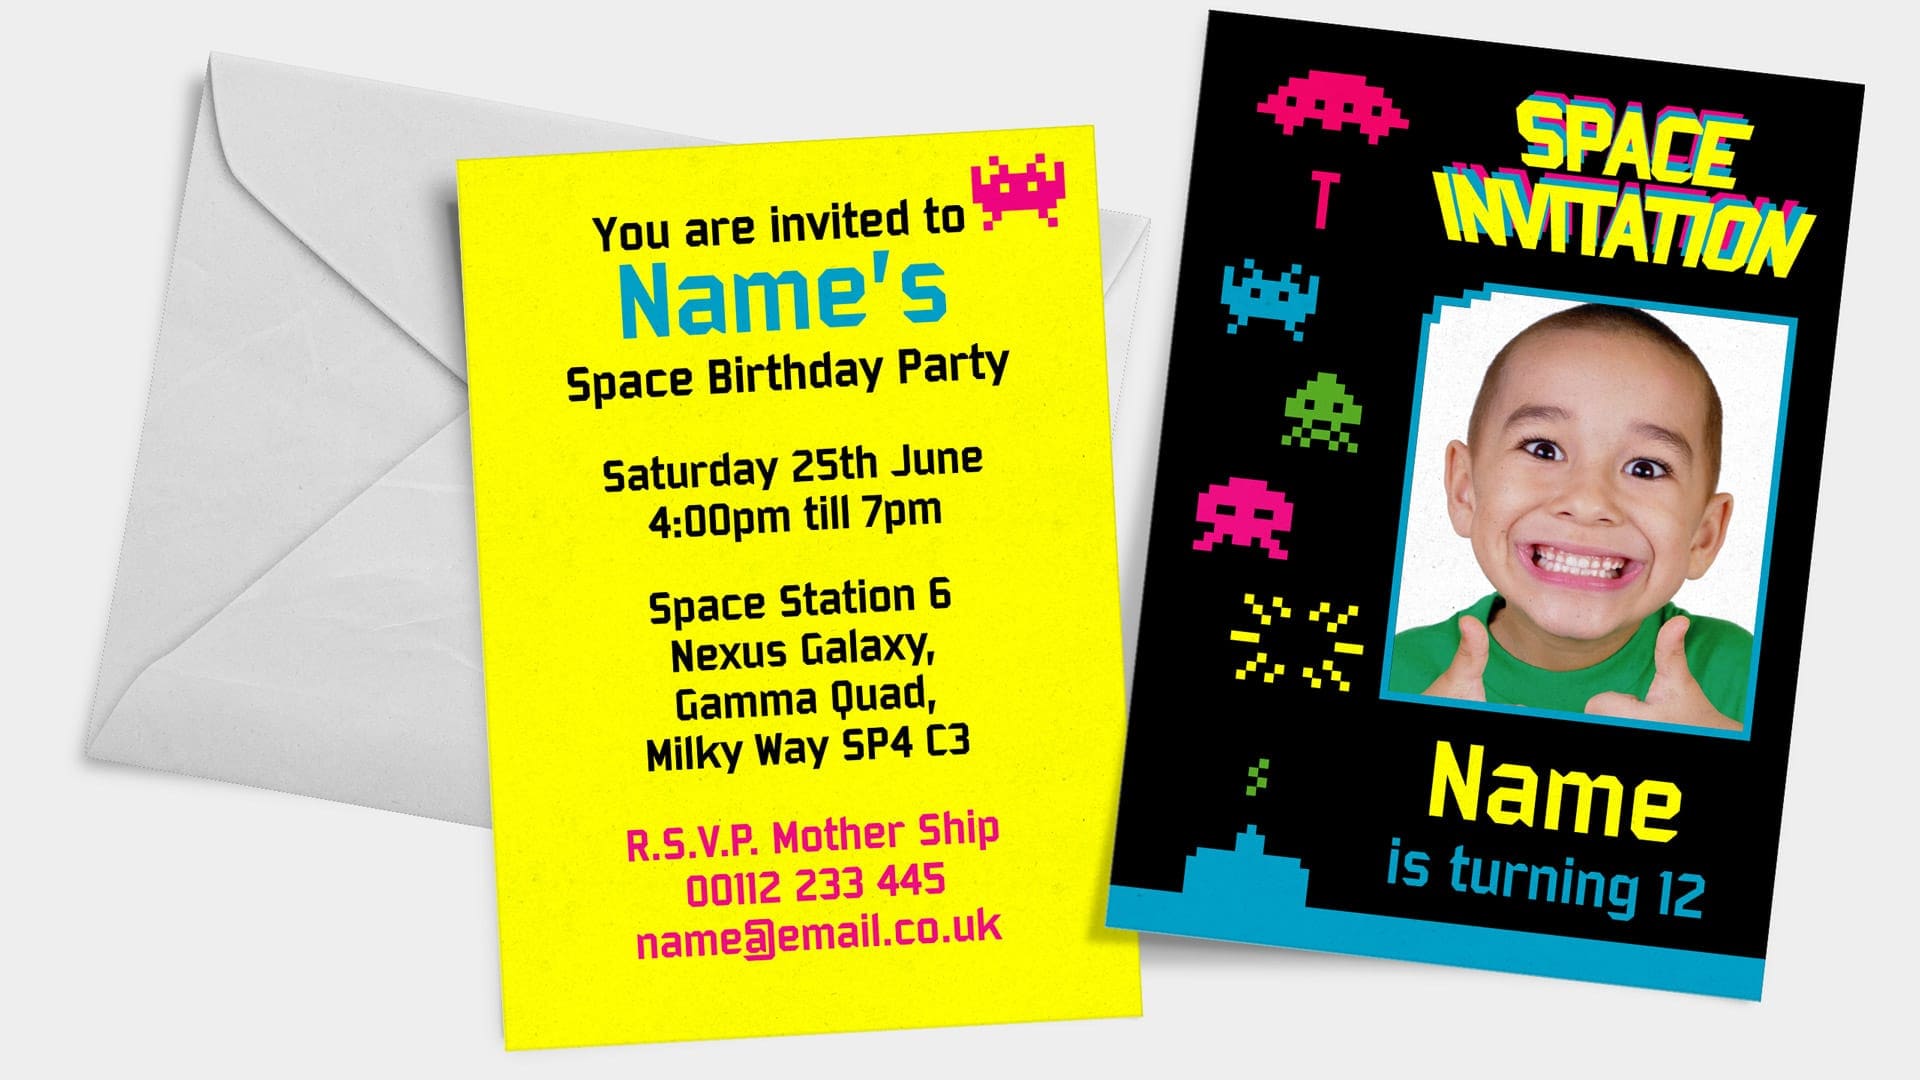 Neil Readhead Party Delights - Personalised Invitations 004